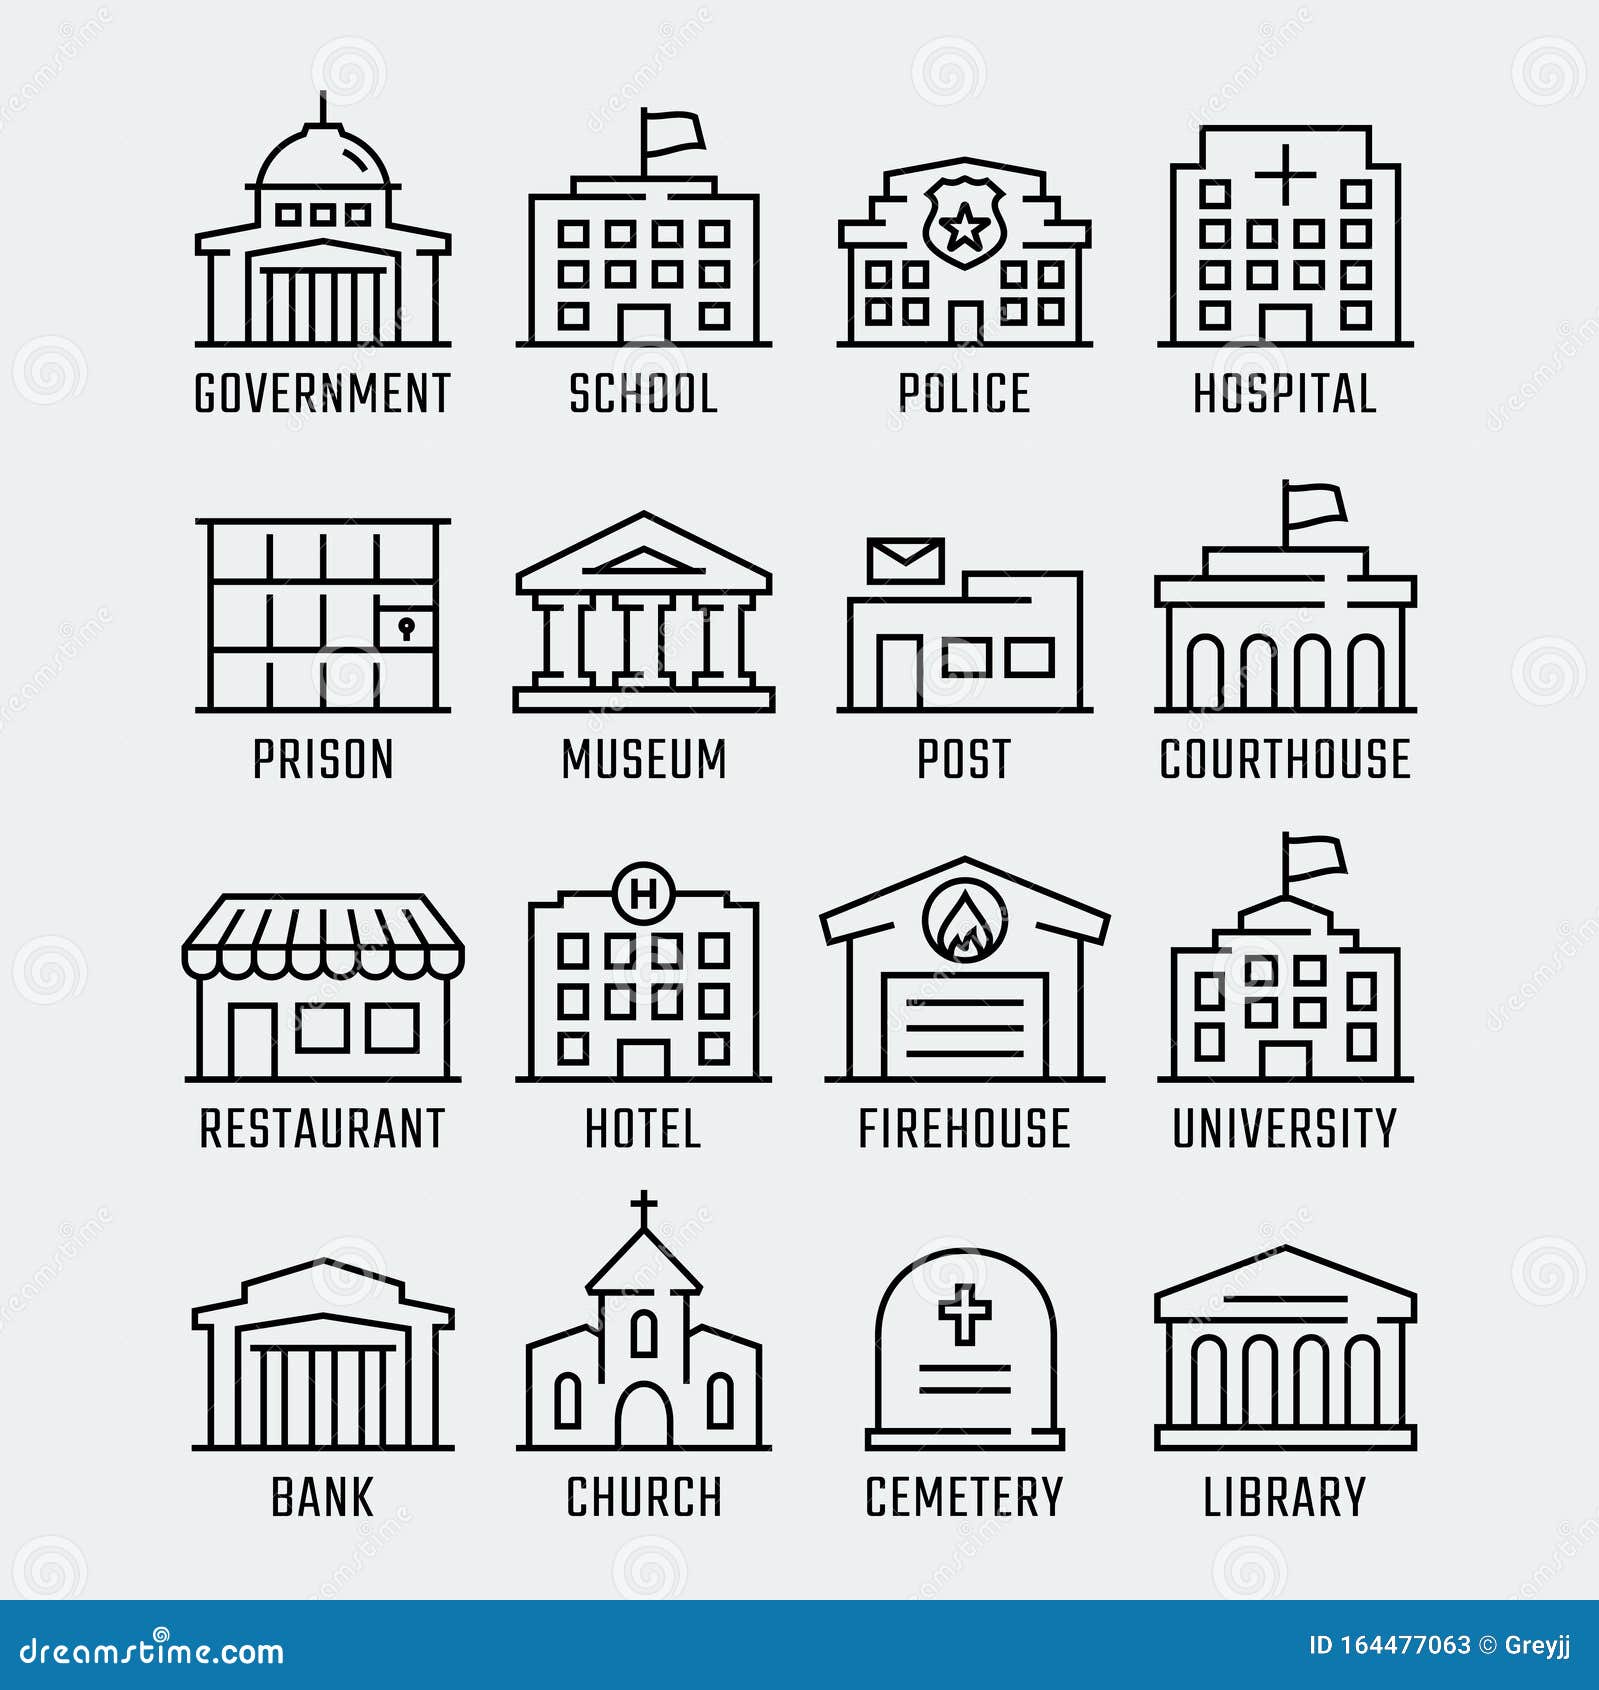 government buildings icons in thin line style